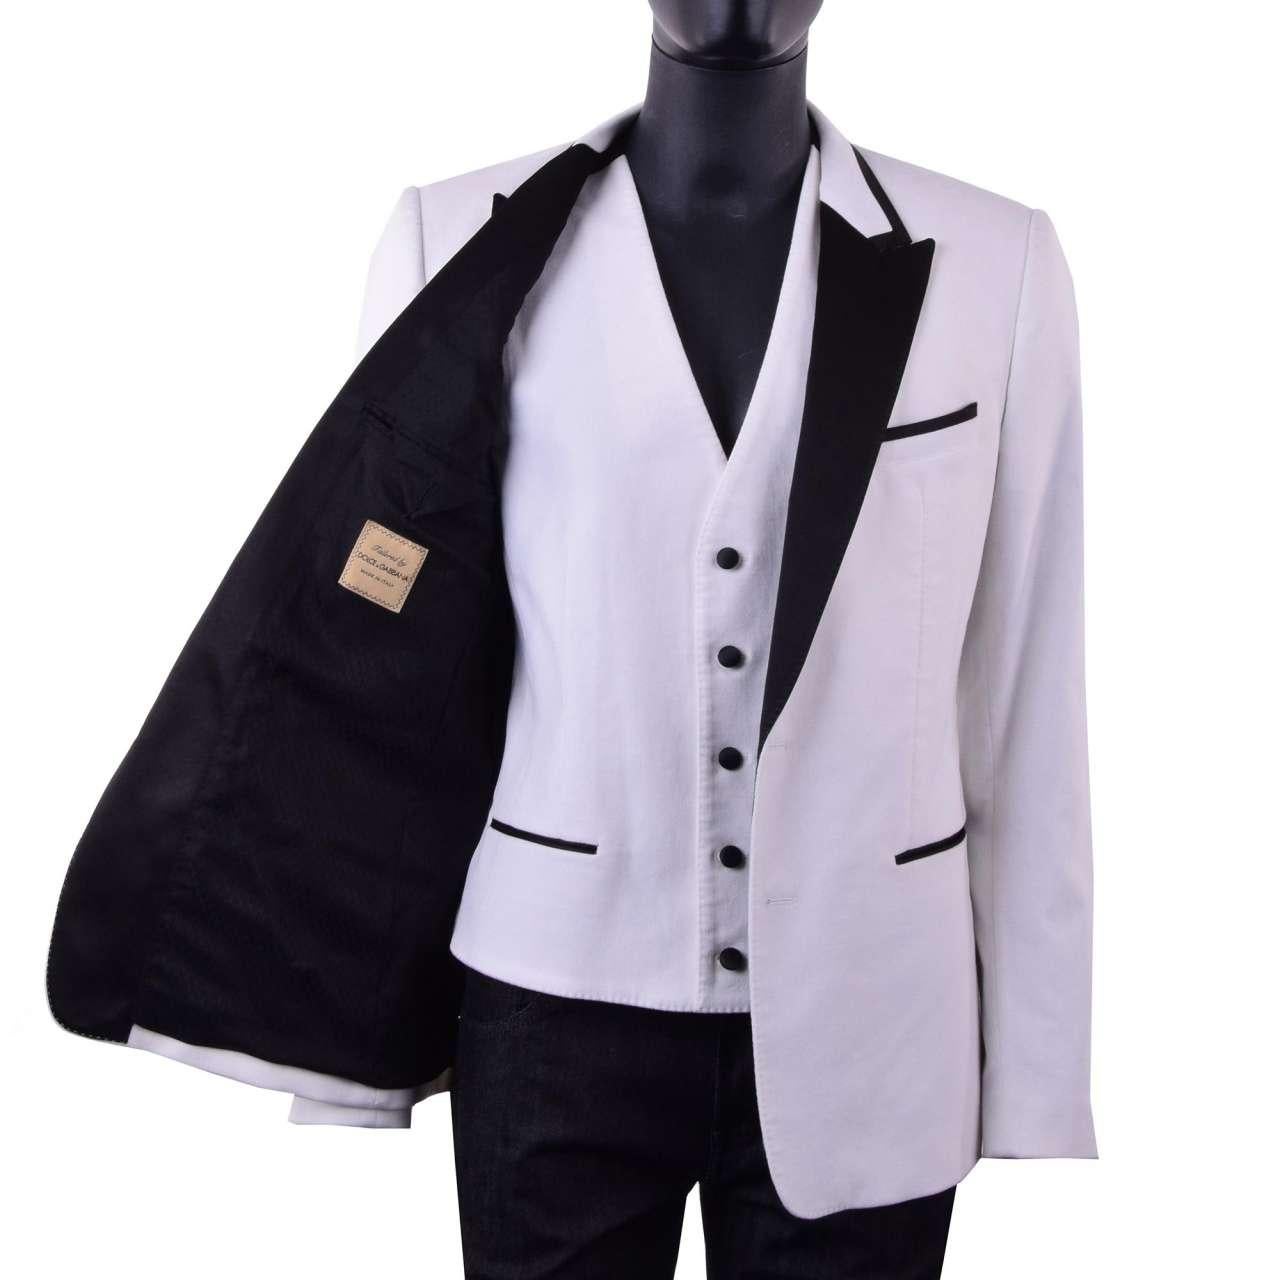 - Velvet tuxedo blazer with vest with a contrast black silk collar by DOLCE & GABBANA Black Label - RUNWAY - DOLCE & GABBANA Fashion Show - Former RRP: EUR 1.750 - Slim Fit - MADE in ITALY - New with Tag - Model: G2HM1T-FUWBI-S9995 - Material: